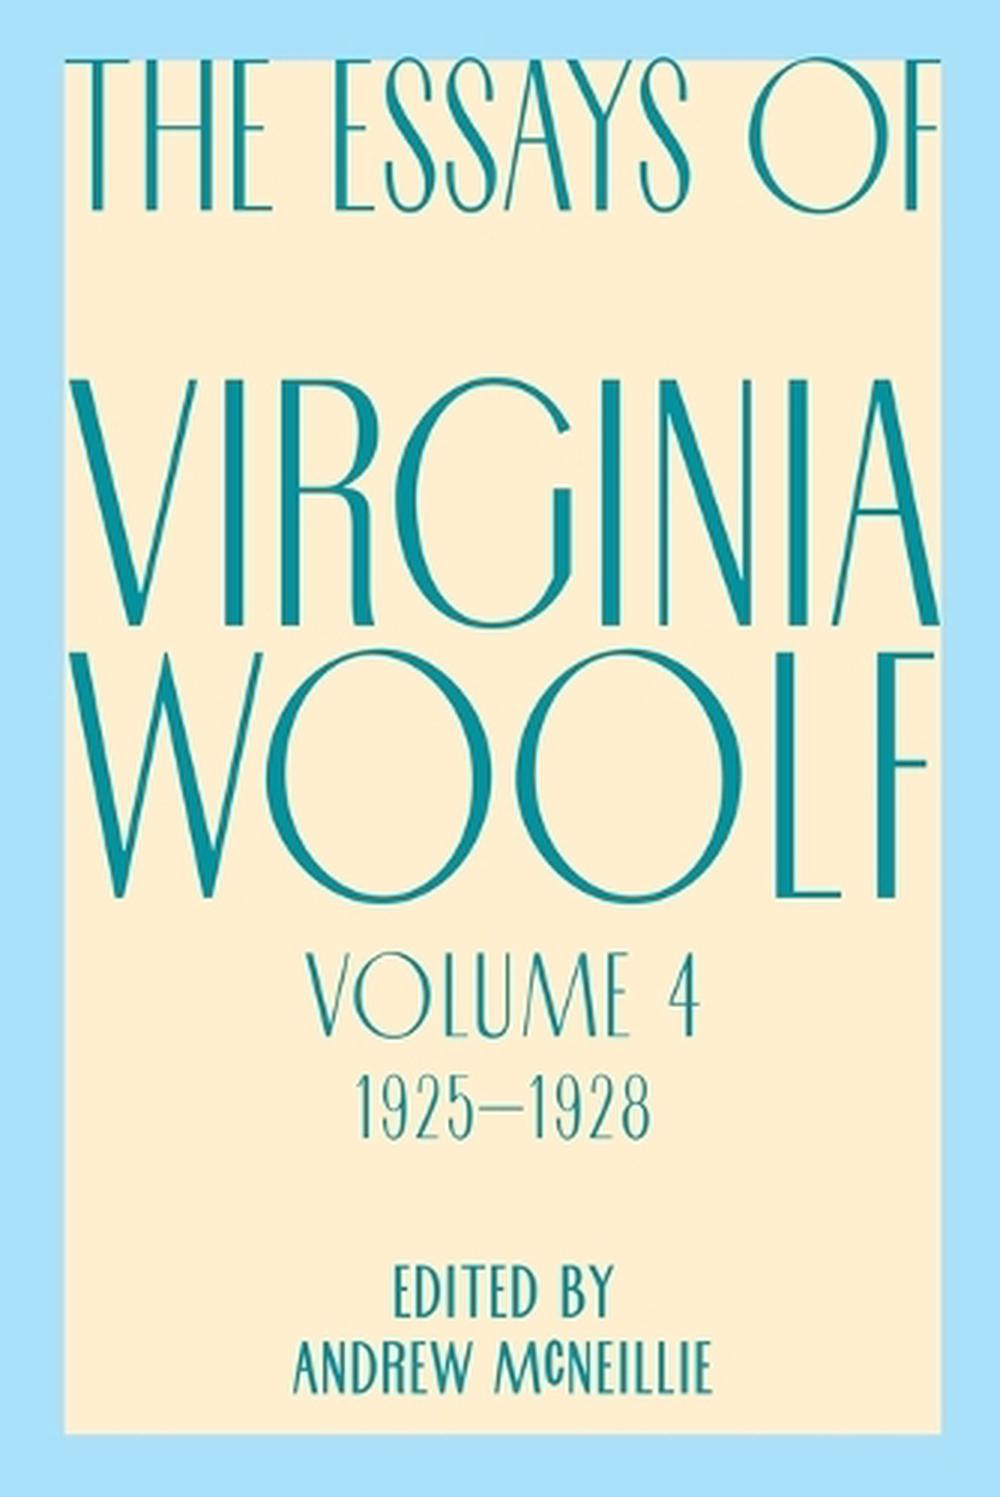 feminist destinations and further essays on virginia woolf